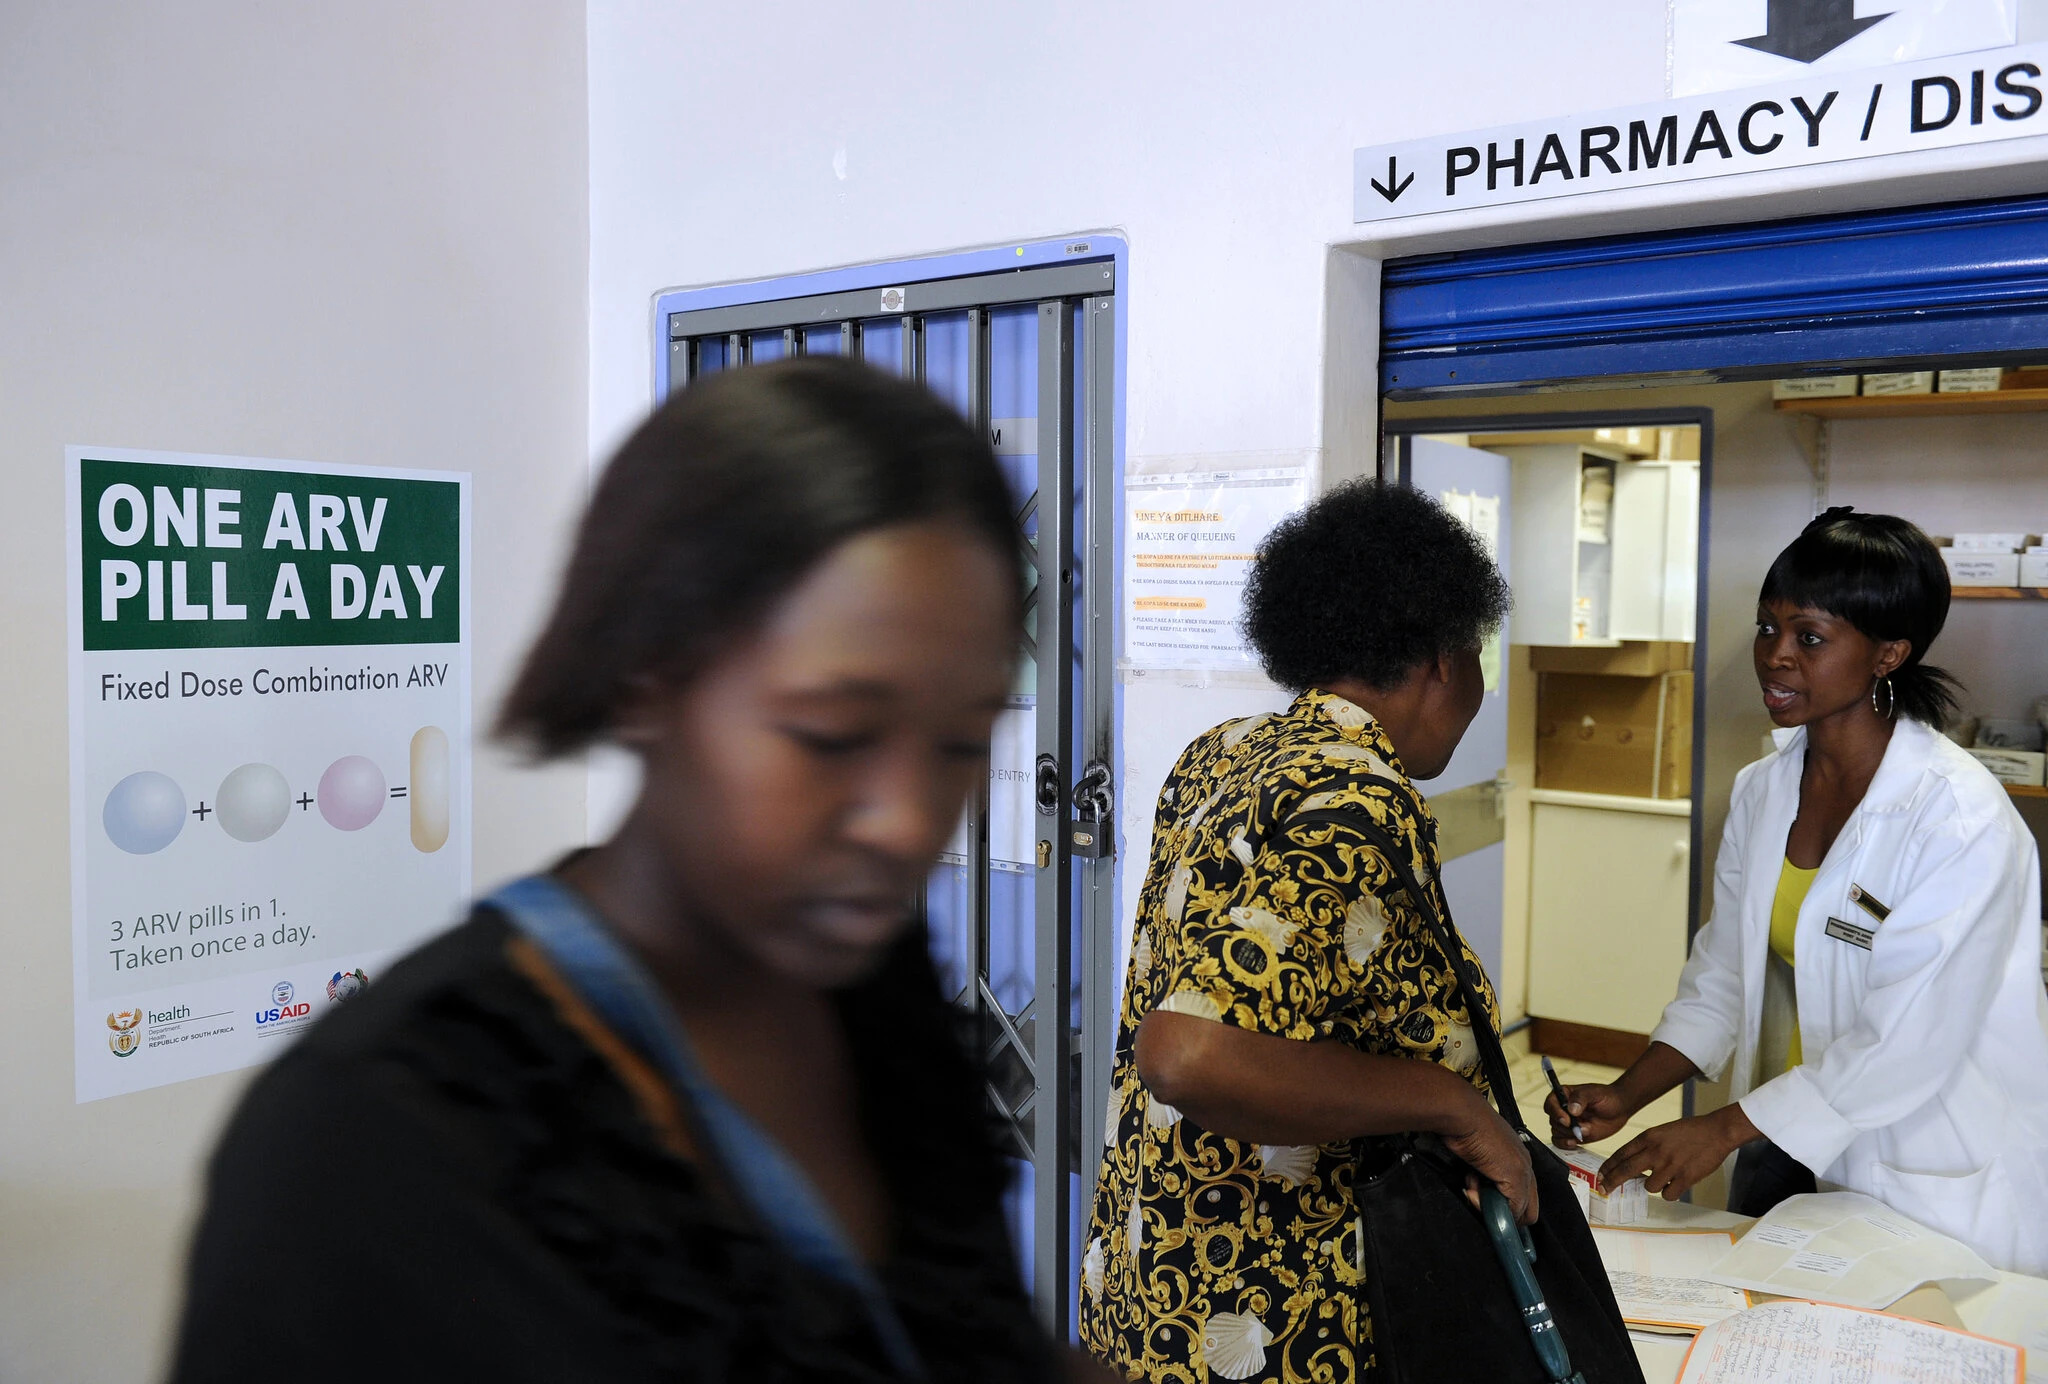 There was a major breakthrough in 2020 in the fight against AIDS. A new antiretroviral administered as an injection six times a year was shown to be 89% more effective at preventing HIV in women compared to standard ARVs, which are taken as a daily pill. 